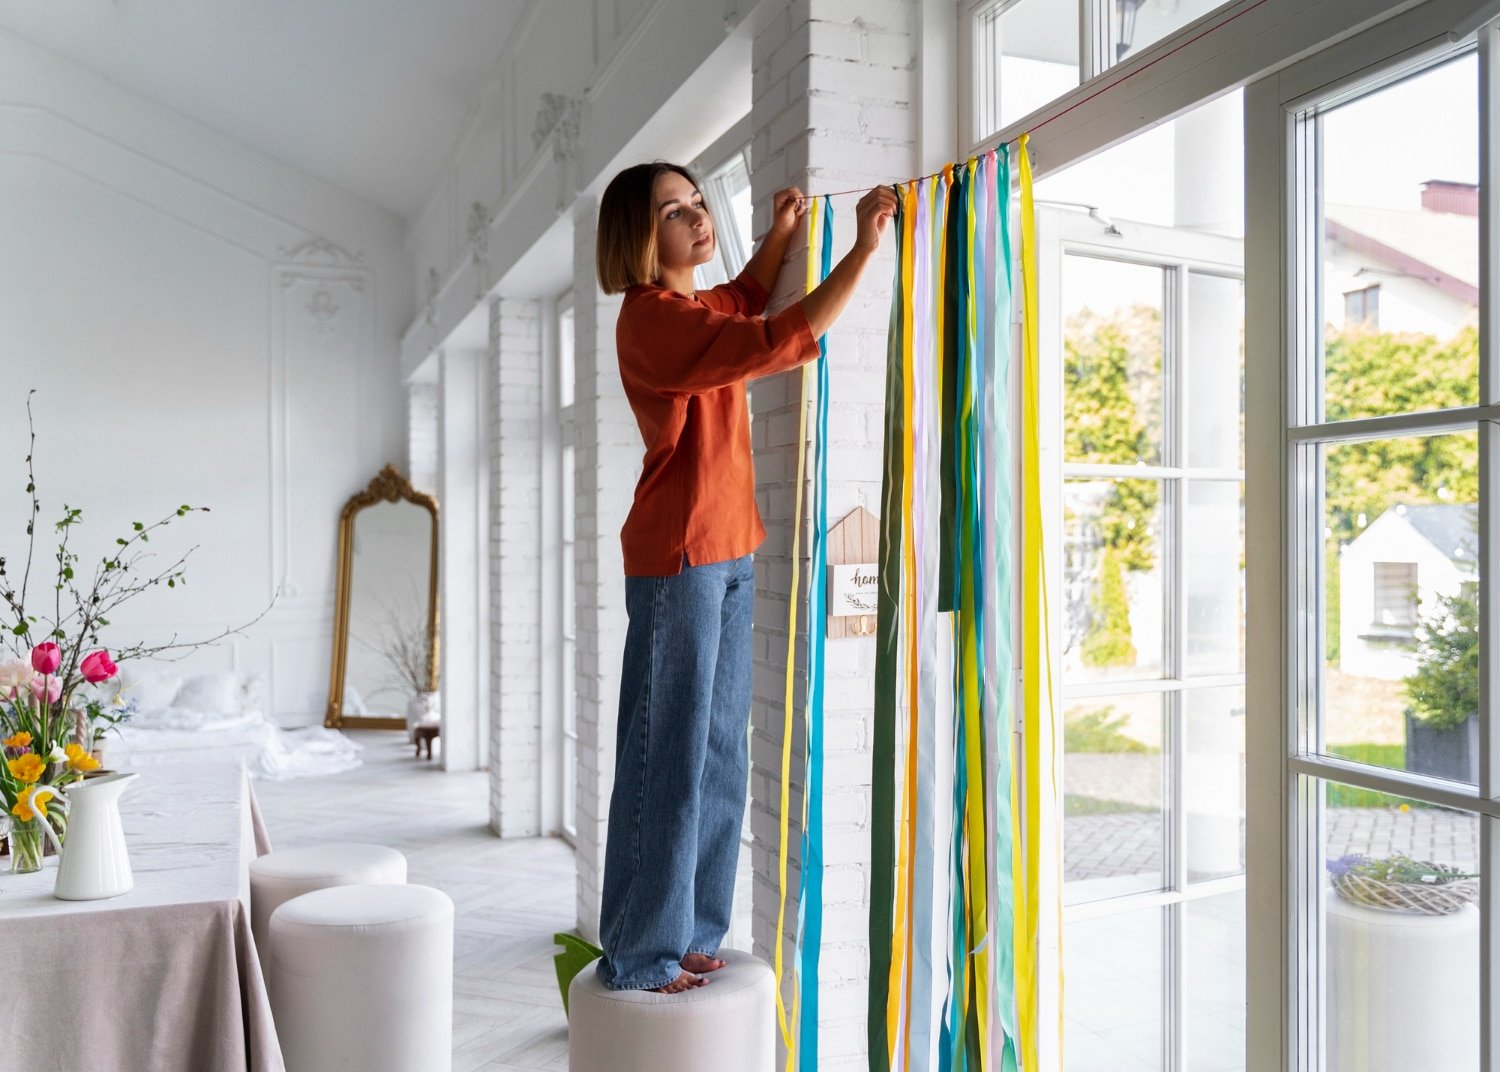 You are currently viewing Enhance Your Home’s Privacy And Style With Blinds.com’s Custom Window Treatments